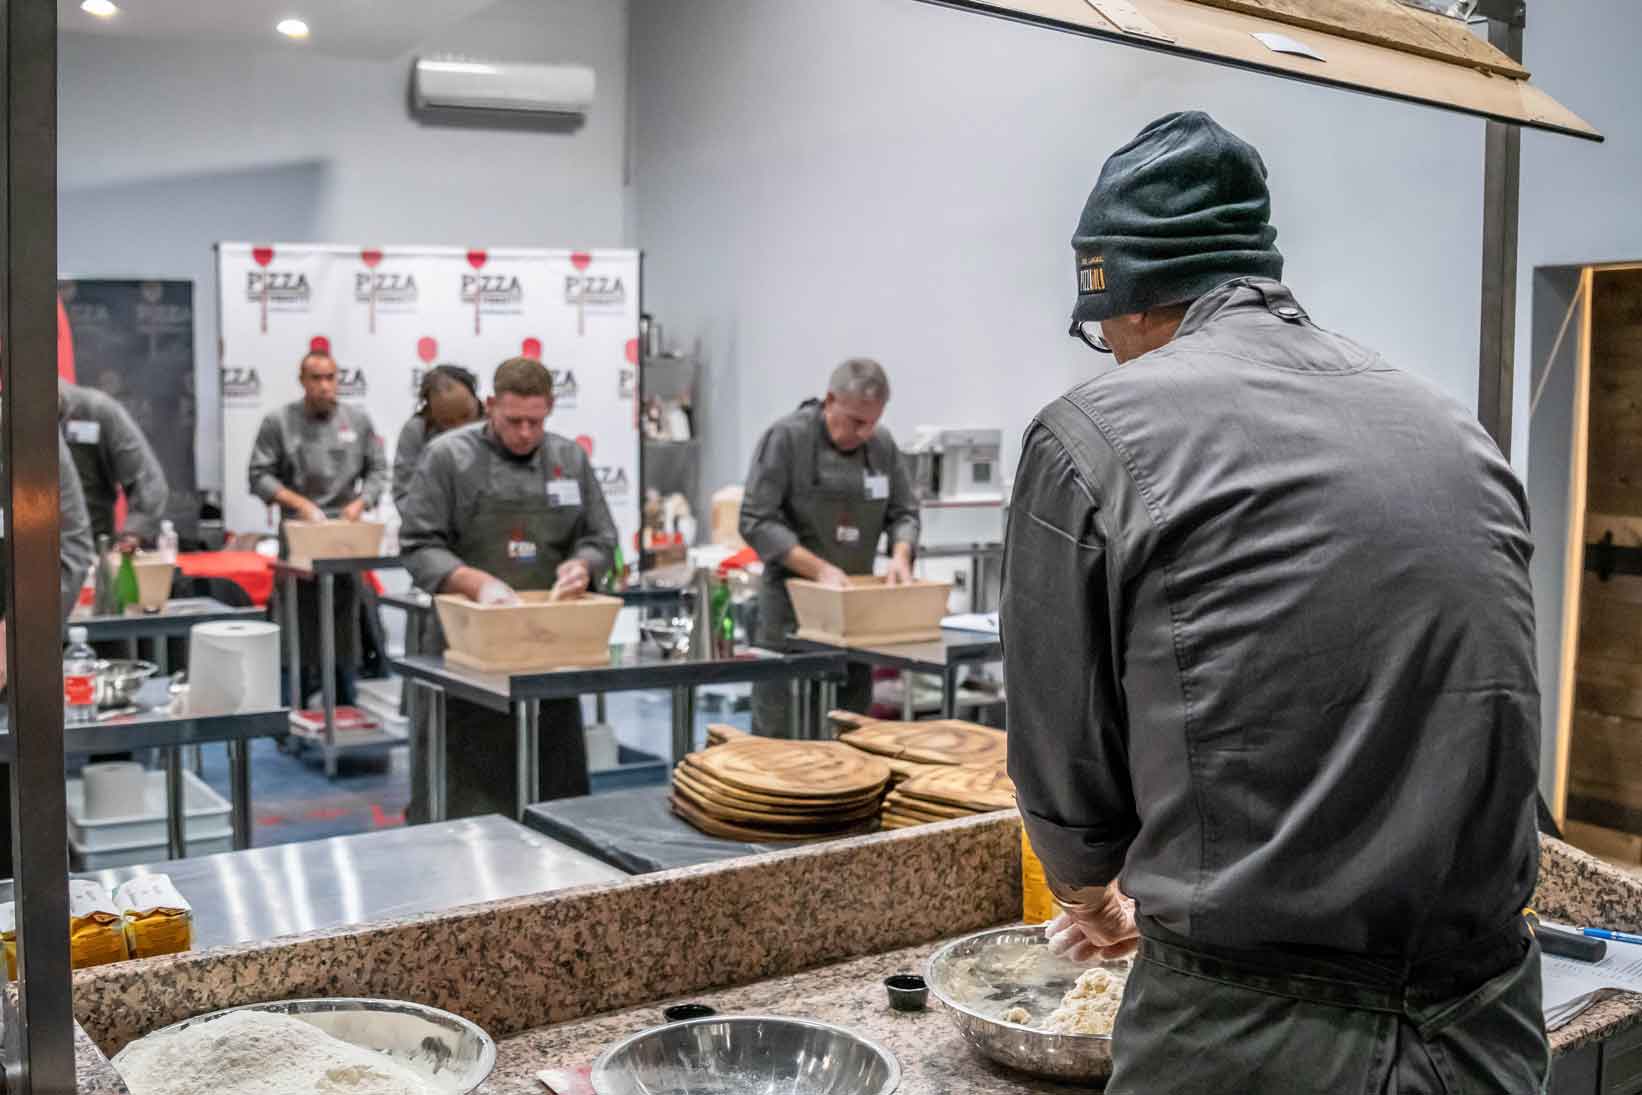 Chef instructor stands under mirror to teach students how to properly mix dough